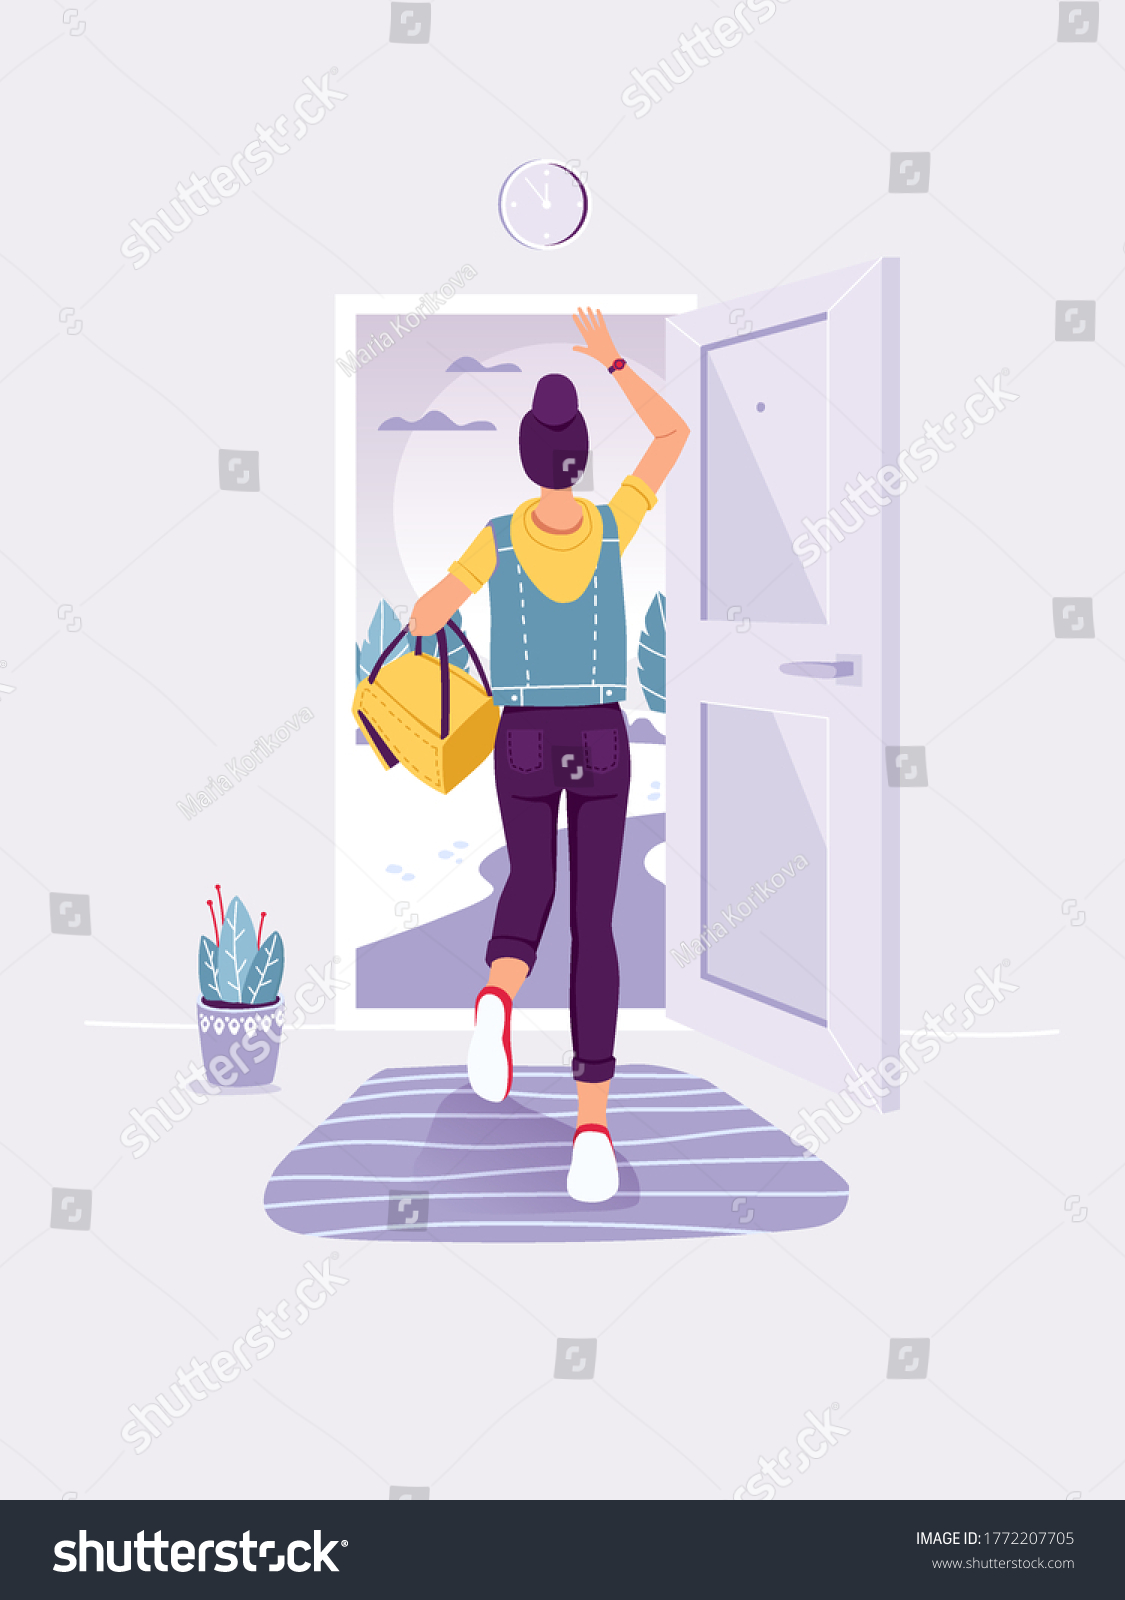 People leaving home. Back view. Lady staing in the doorway. Woman running into open door. Exit and escape concept. Trendy flat vector illustration. #1772207705